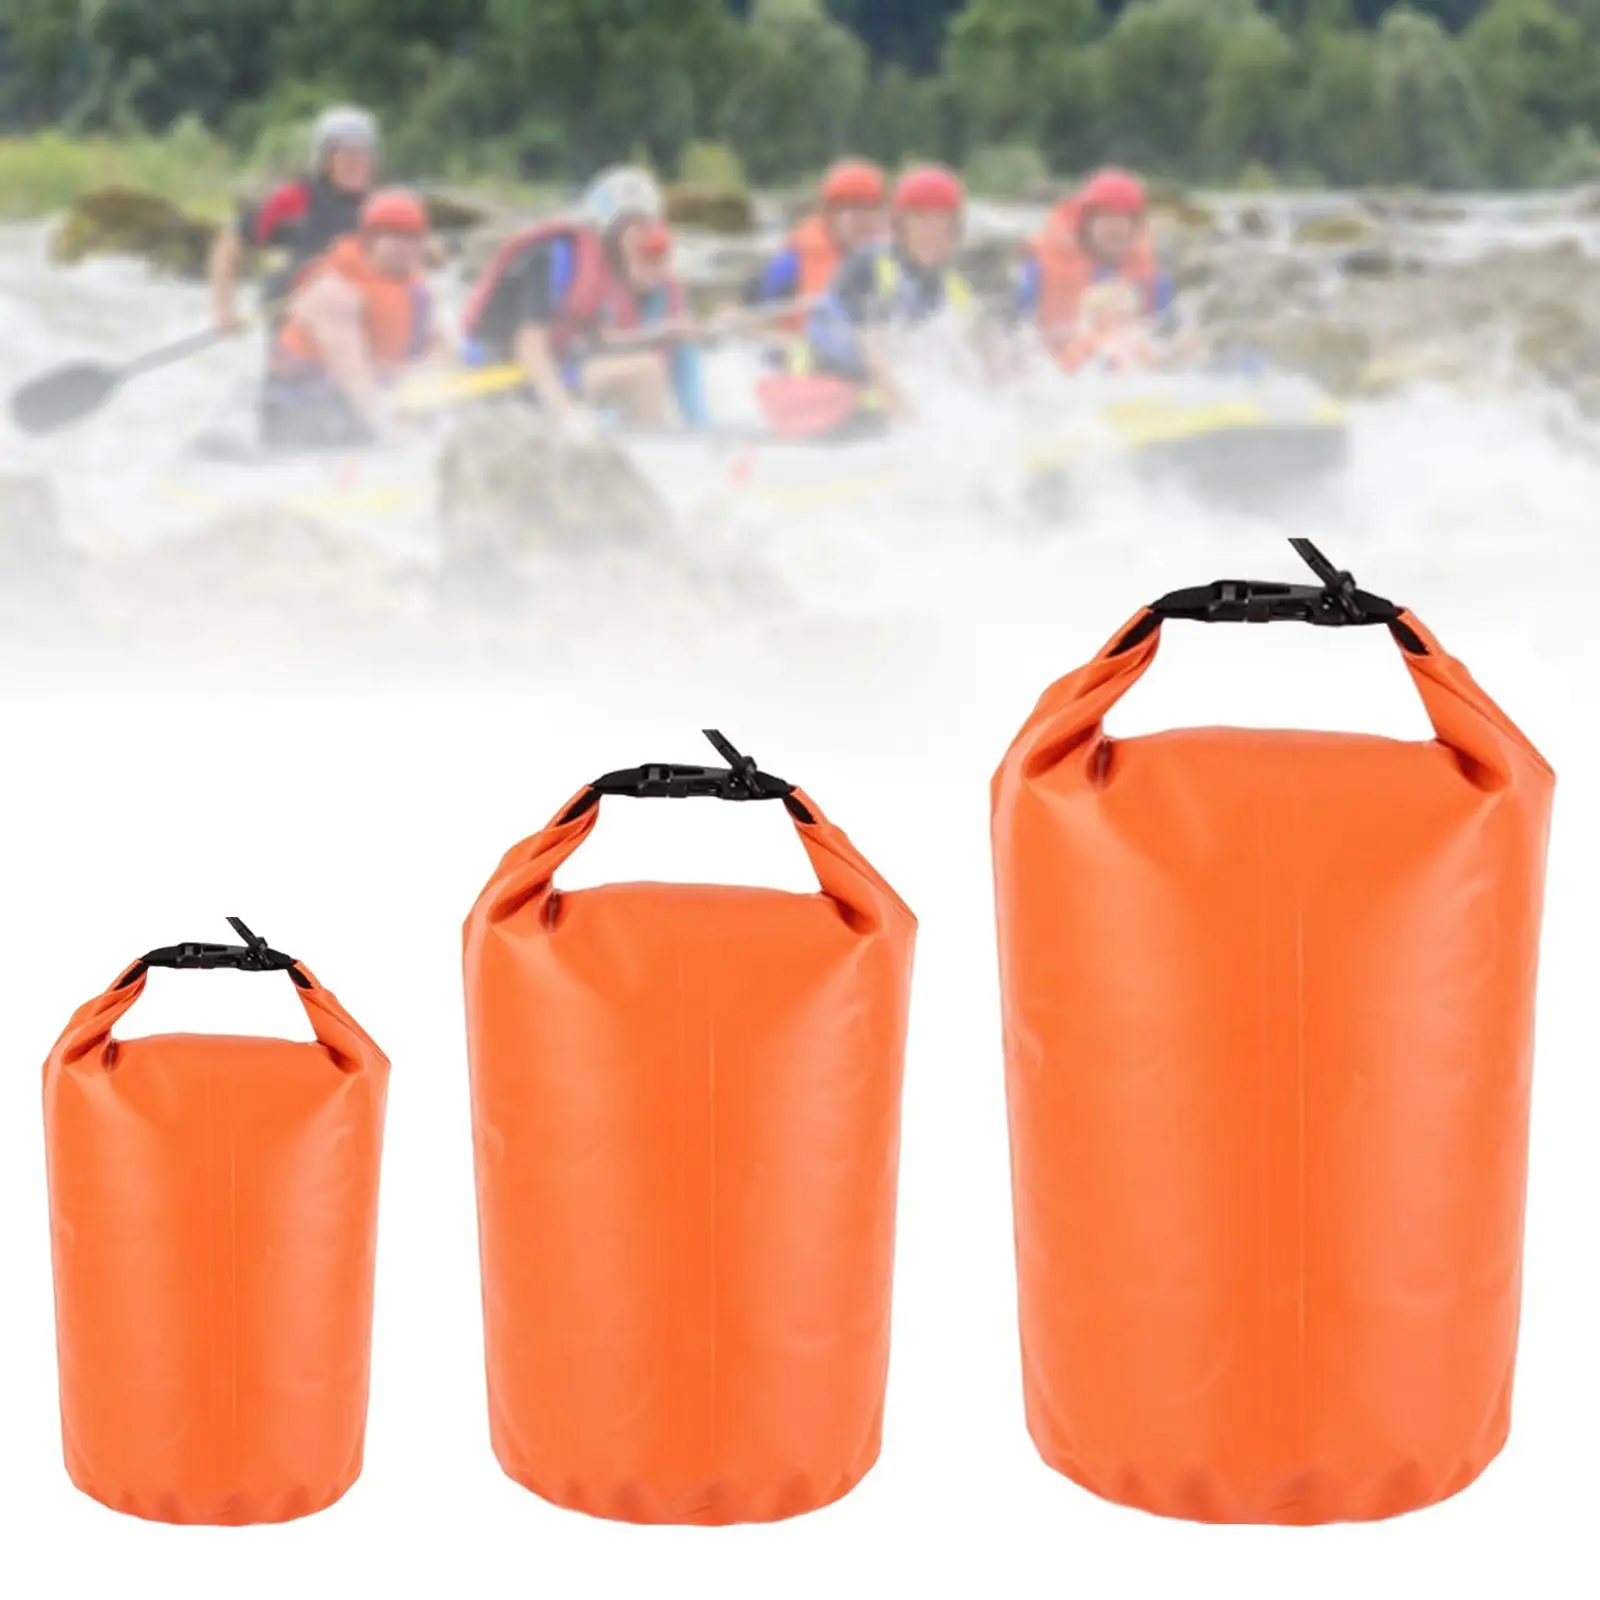 3x Waterproof Dry Bags 8L 40L 70L Organizer Portable Roll Top Storage Dry Sack Bags for Hiking Boating Fishing Rafting Kayaking